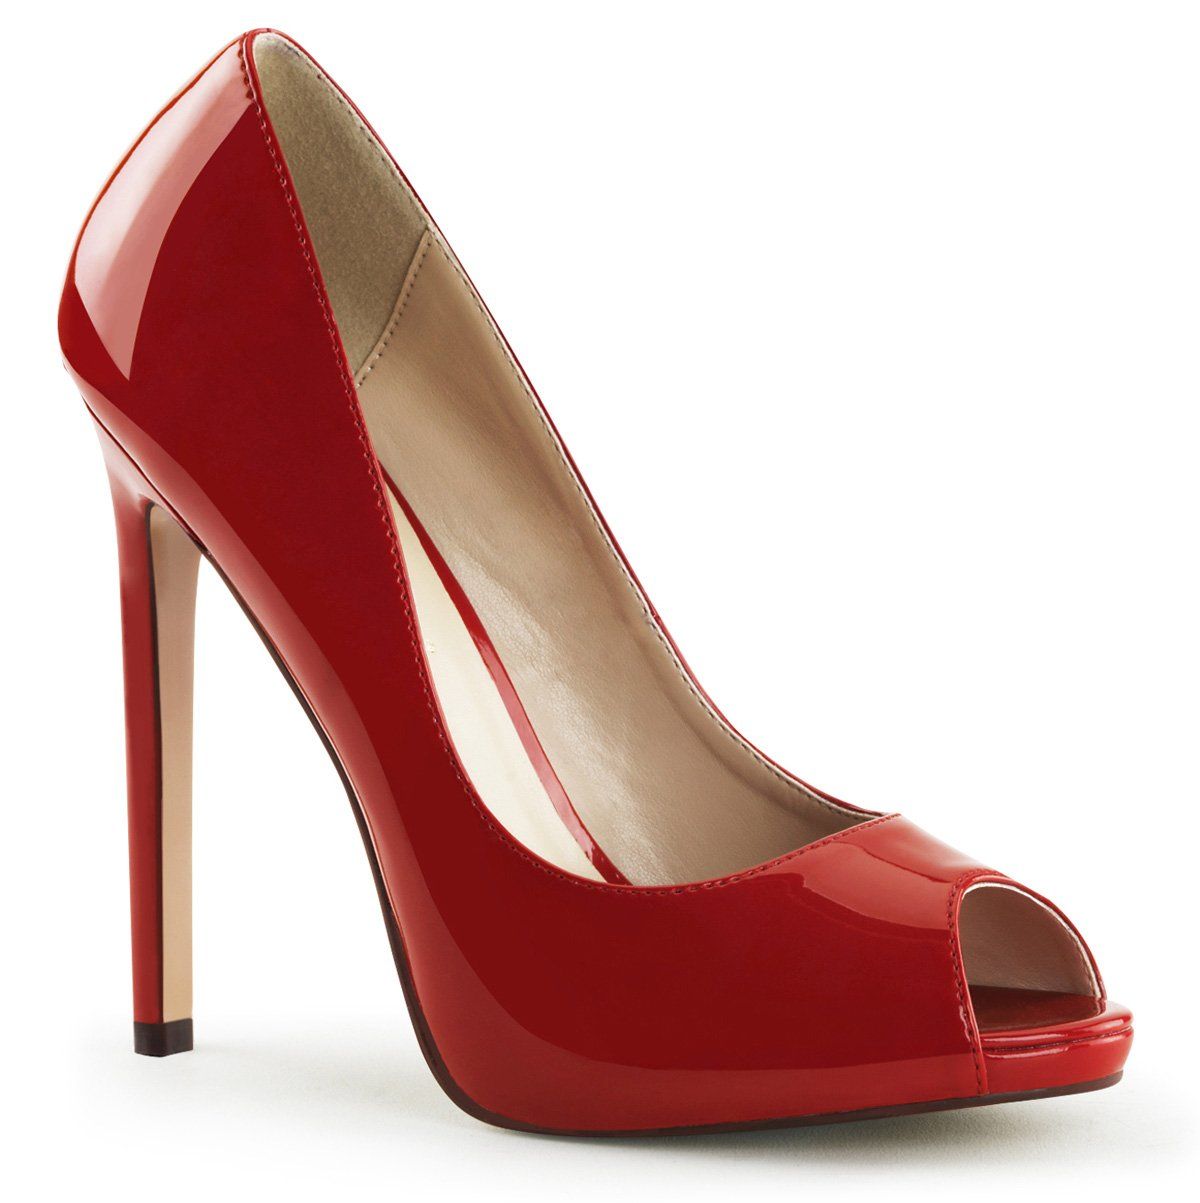 SEXY-42 Red Patent Pump Pleaser